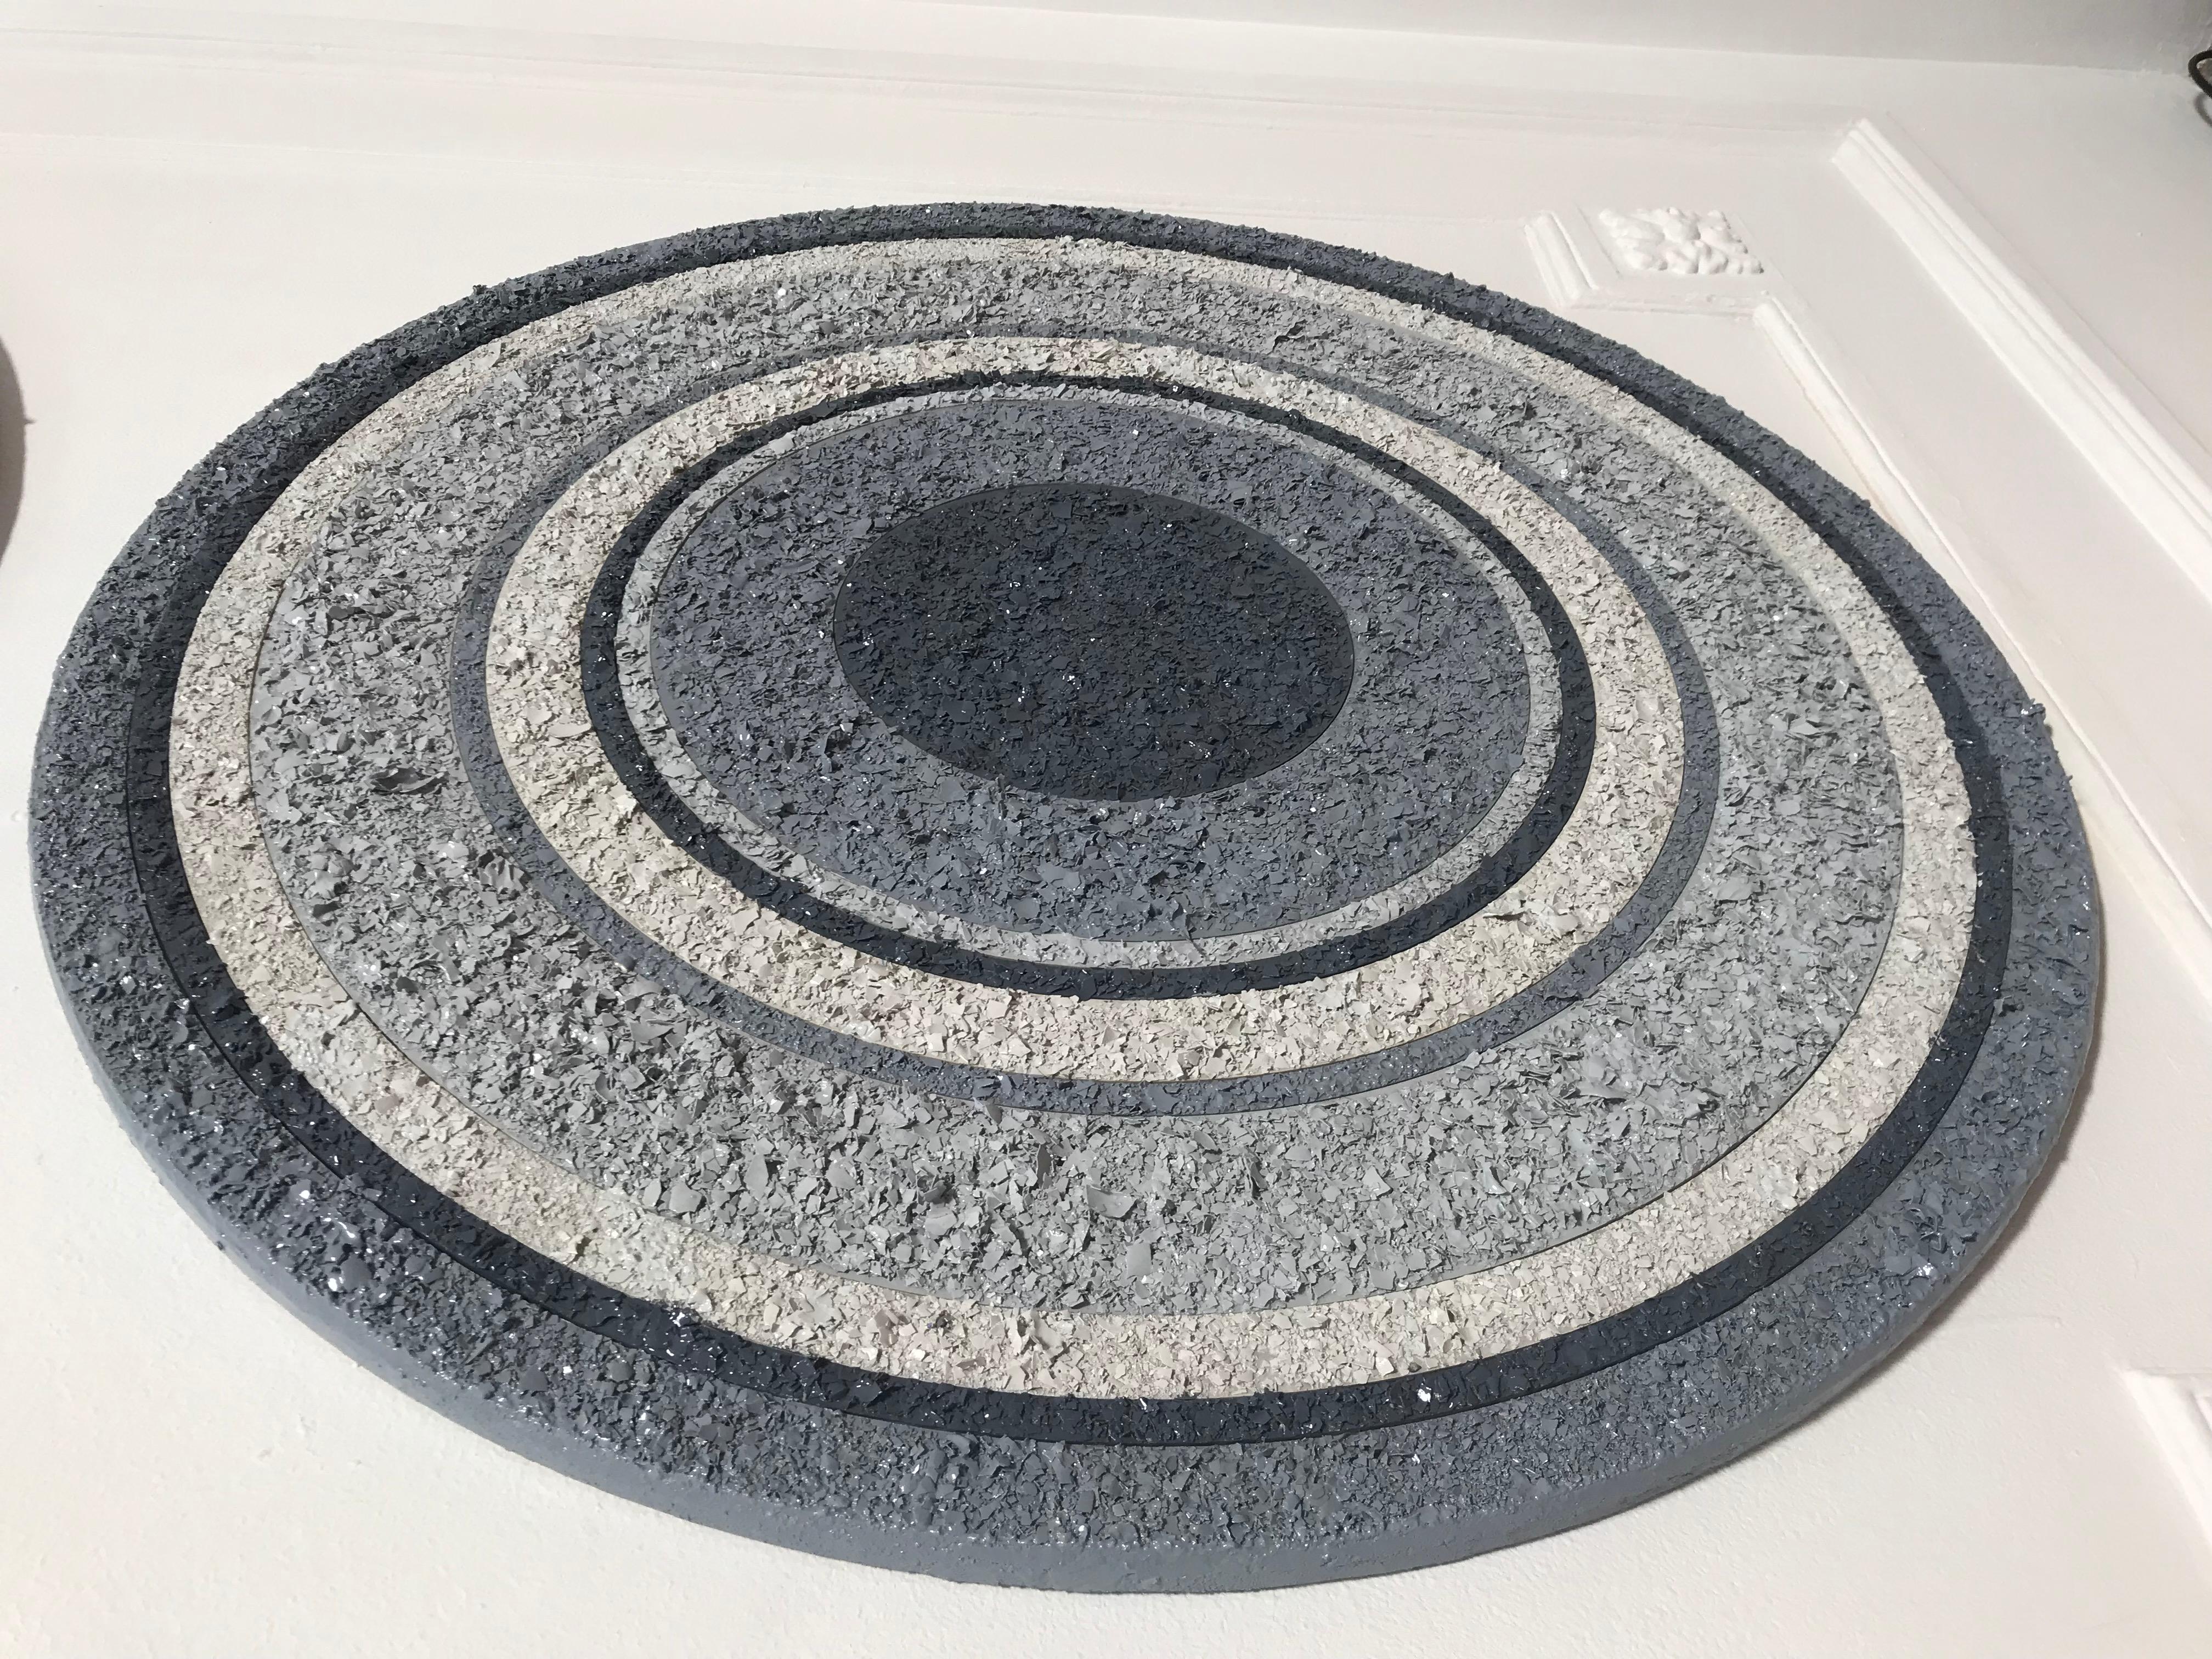 The two artists were inspired by water and sound frequencies and decided to represent this feeling with a recycled material. The cycles in the circles transport us to the movement in life. Our fragility as human beings and our relationship with